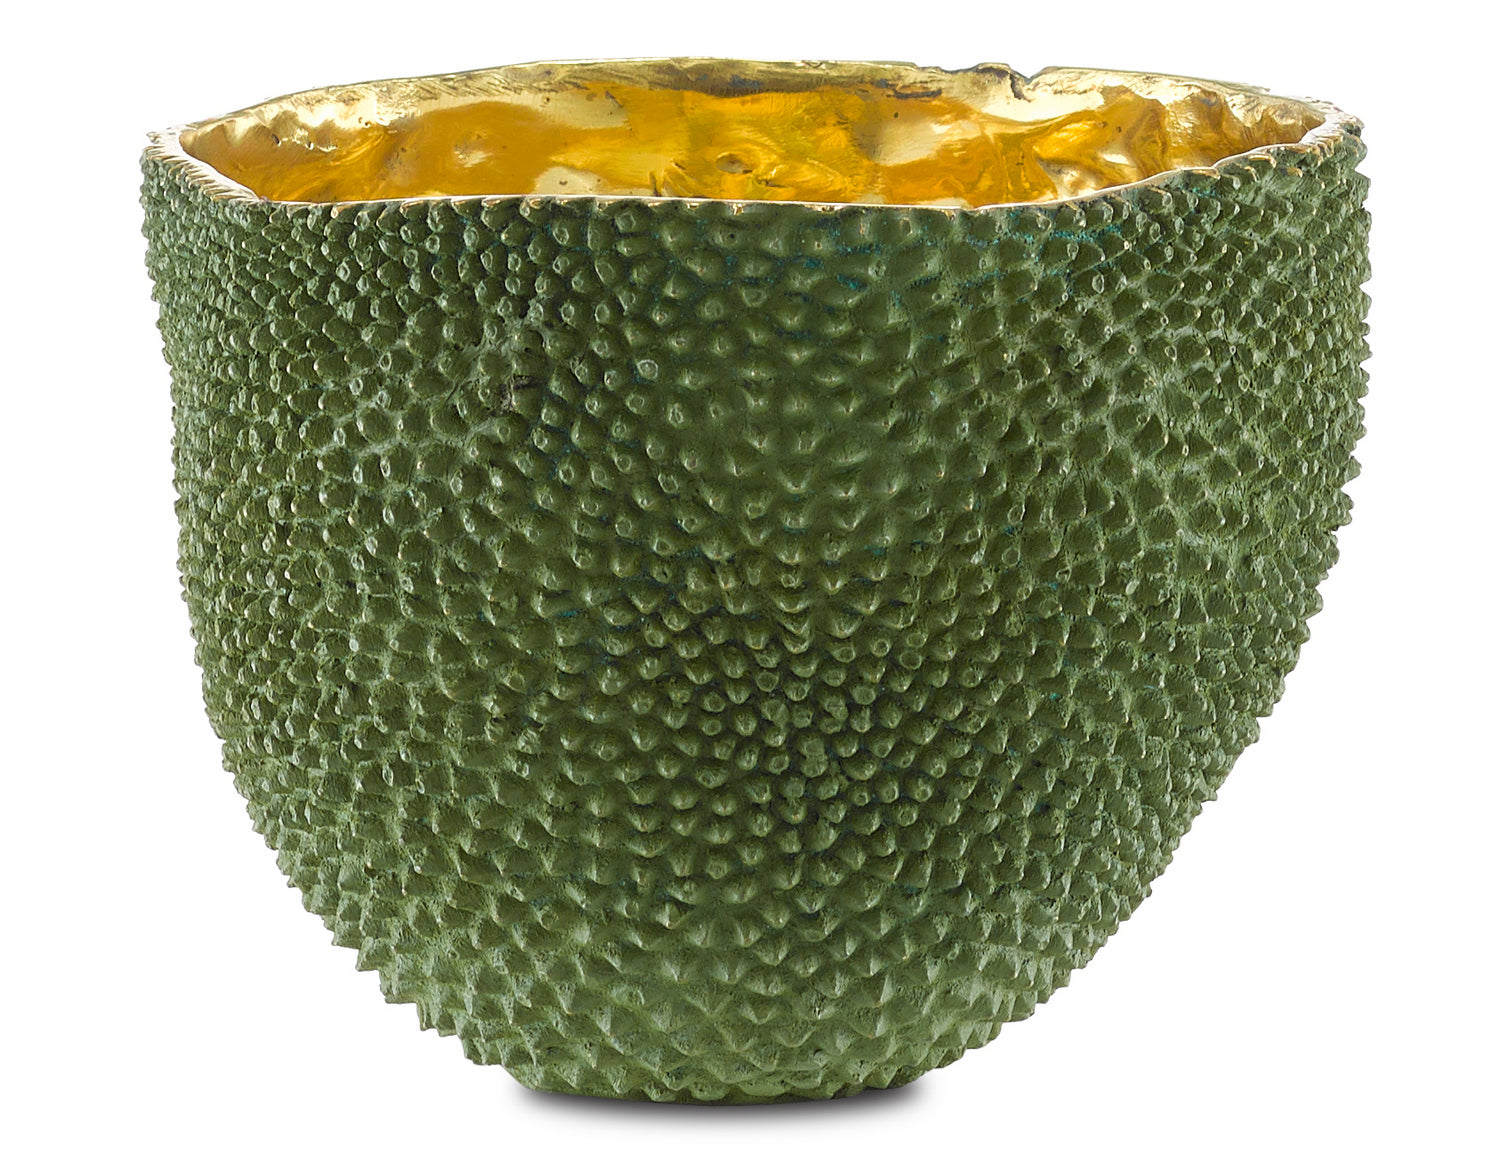 Vase from the Jackfruit collection in Green/Gold finish